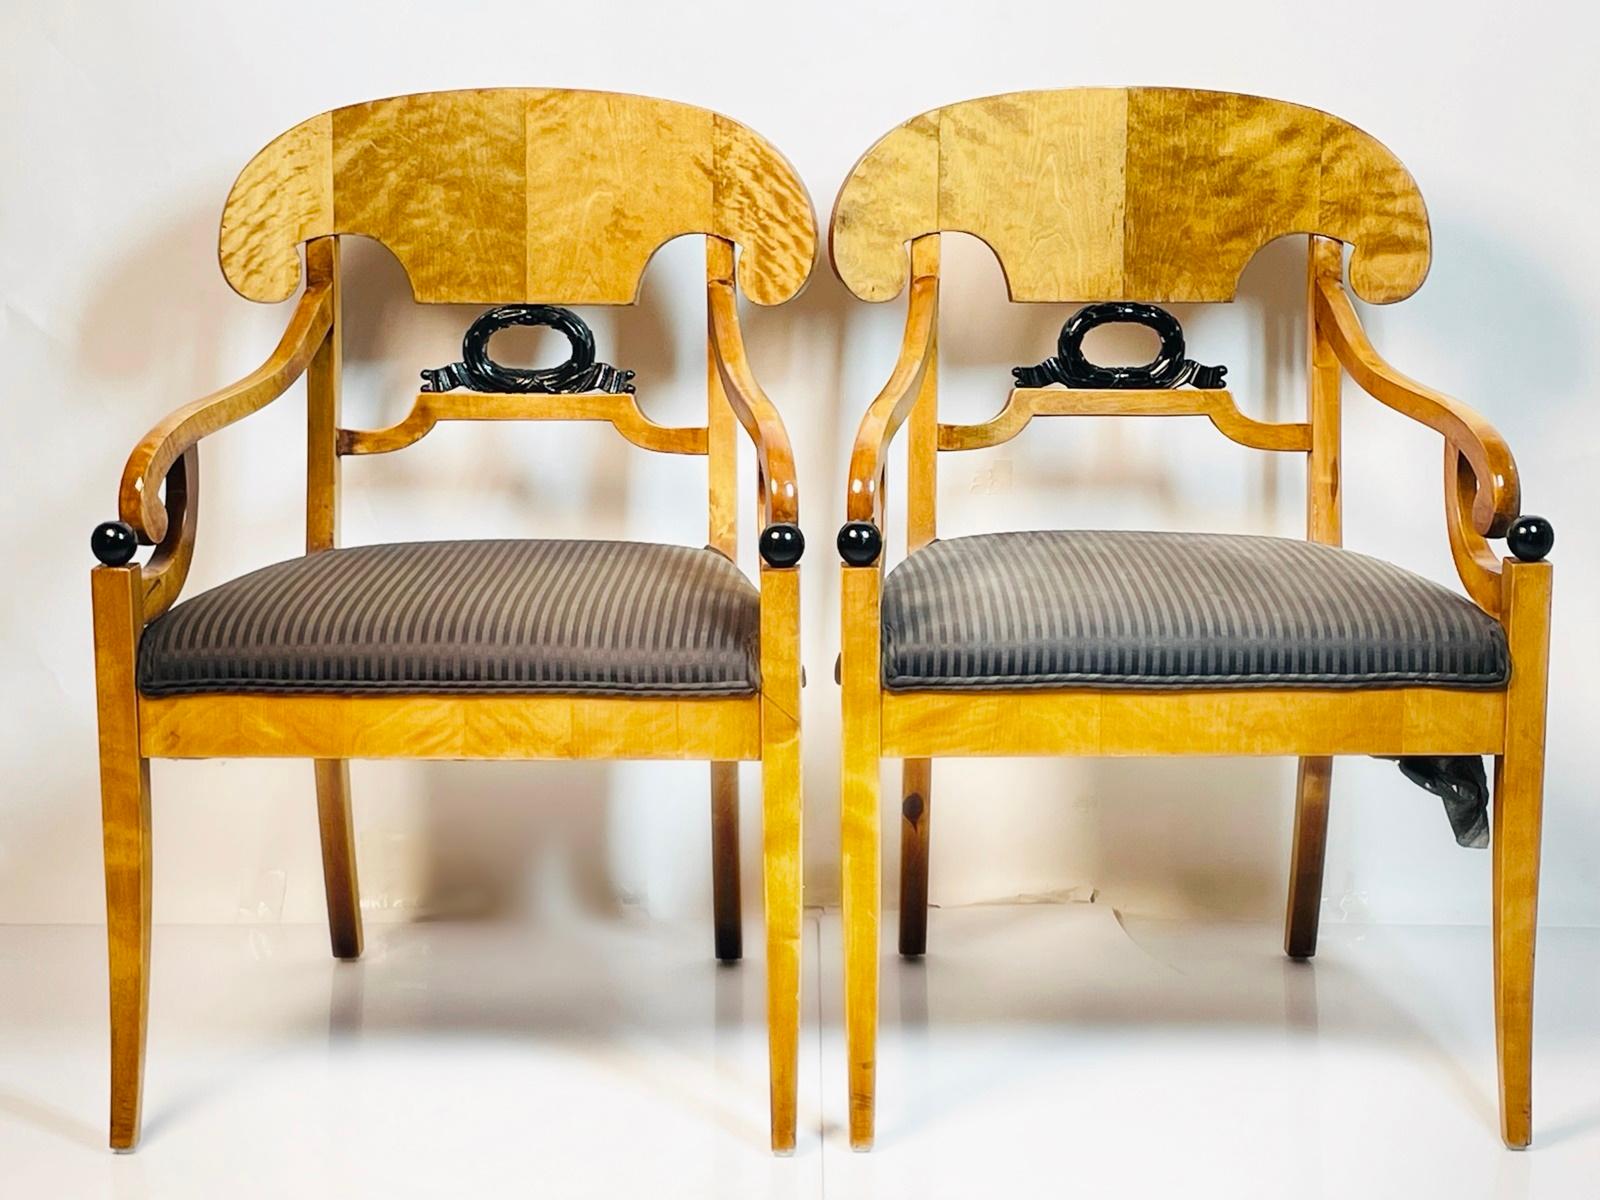 Hand-Crafted Pair of Biedermeier Arm Chairs in Flame Birch Wood, Sweden 1900s For Sale